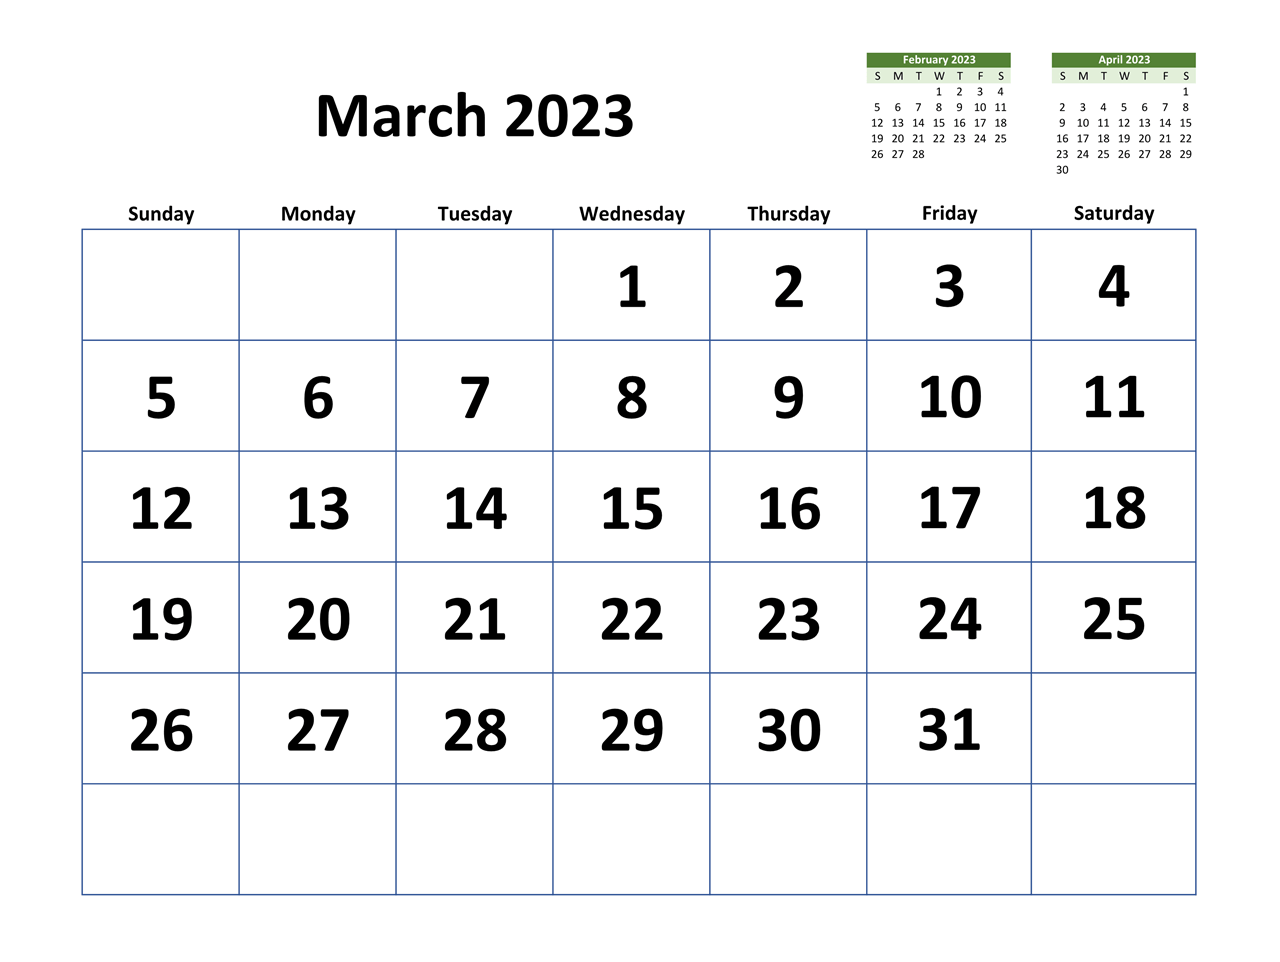 March 2023 Calendar With Holidays